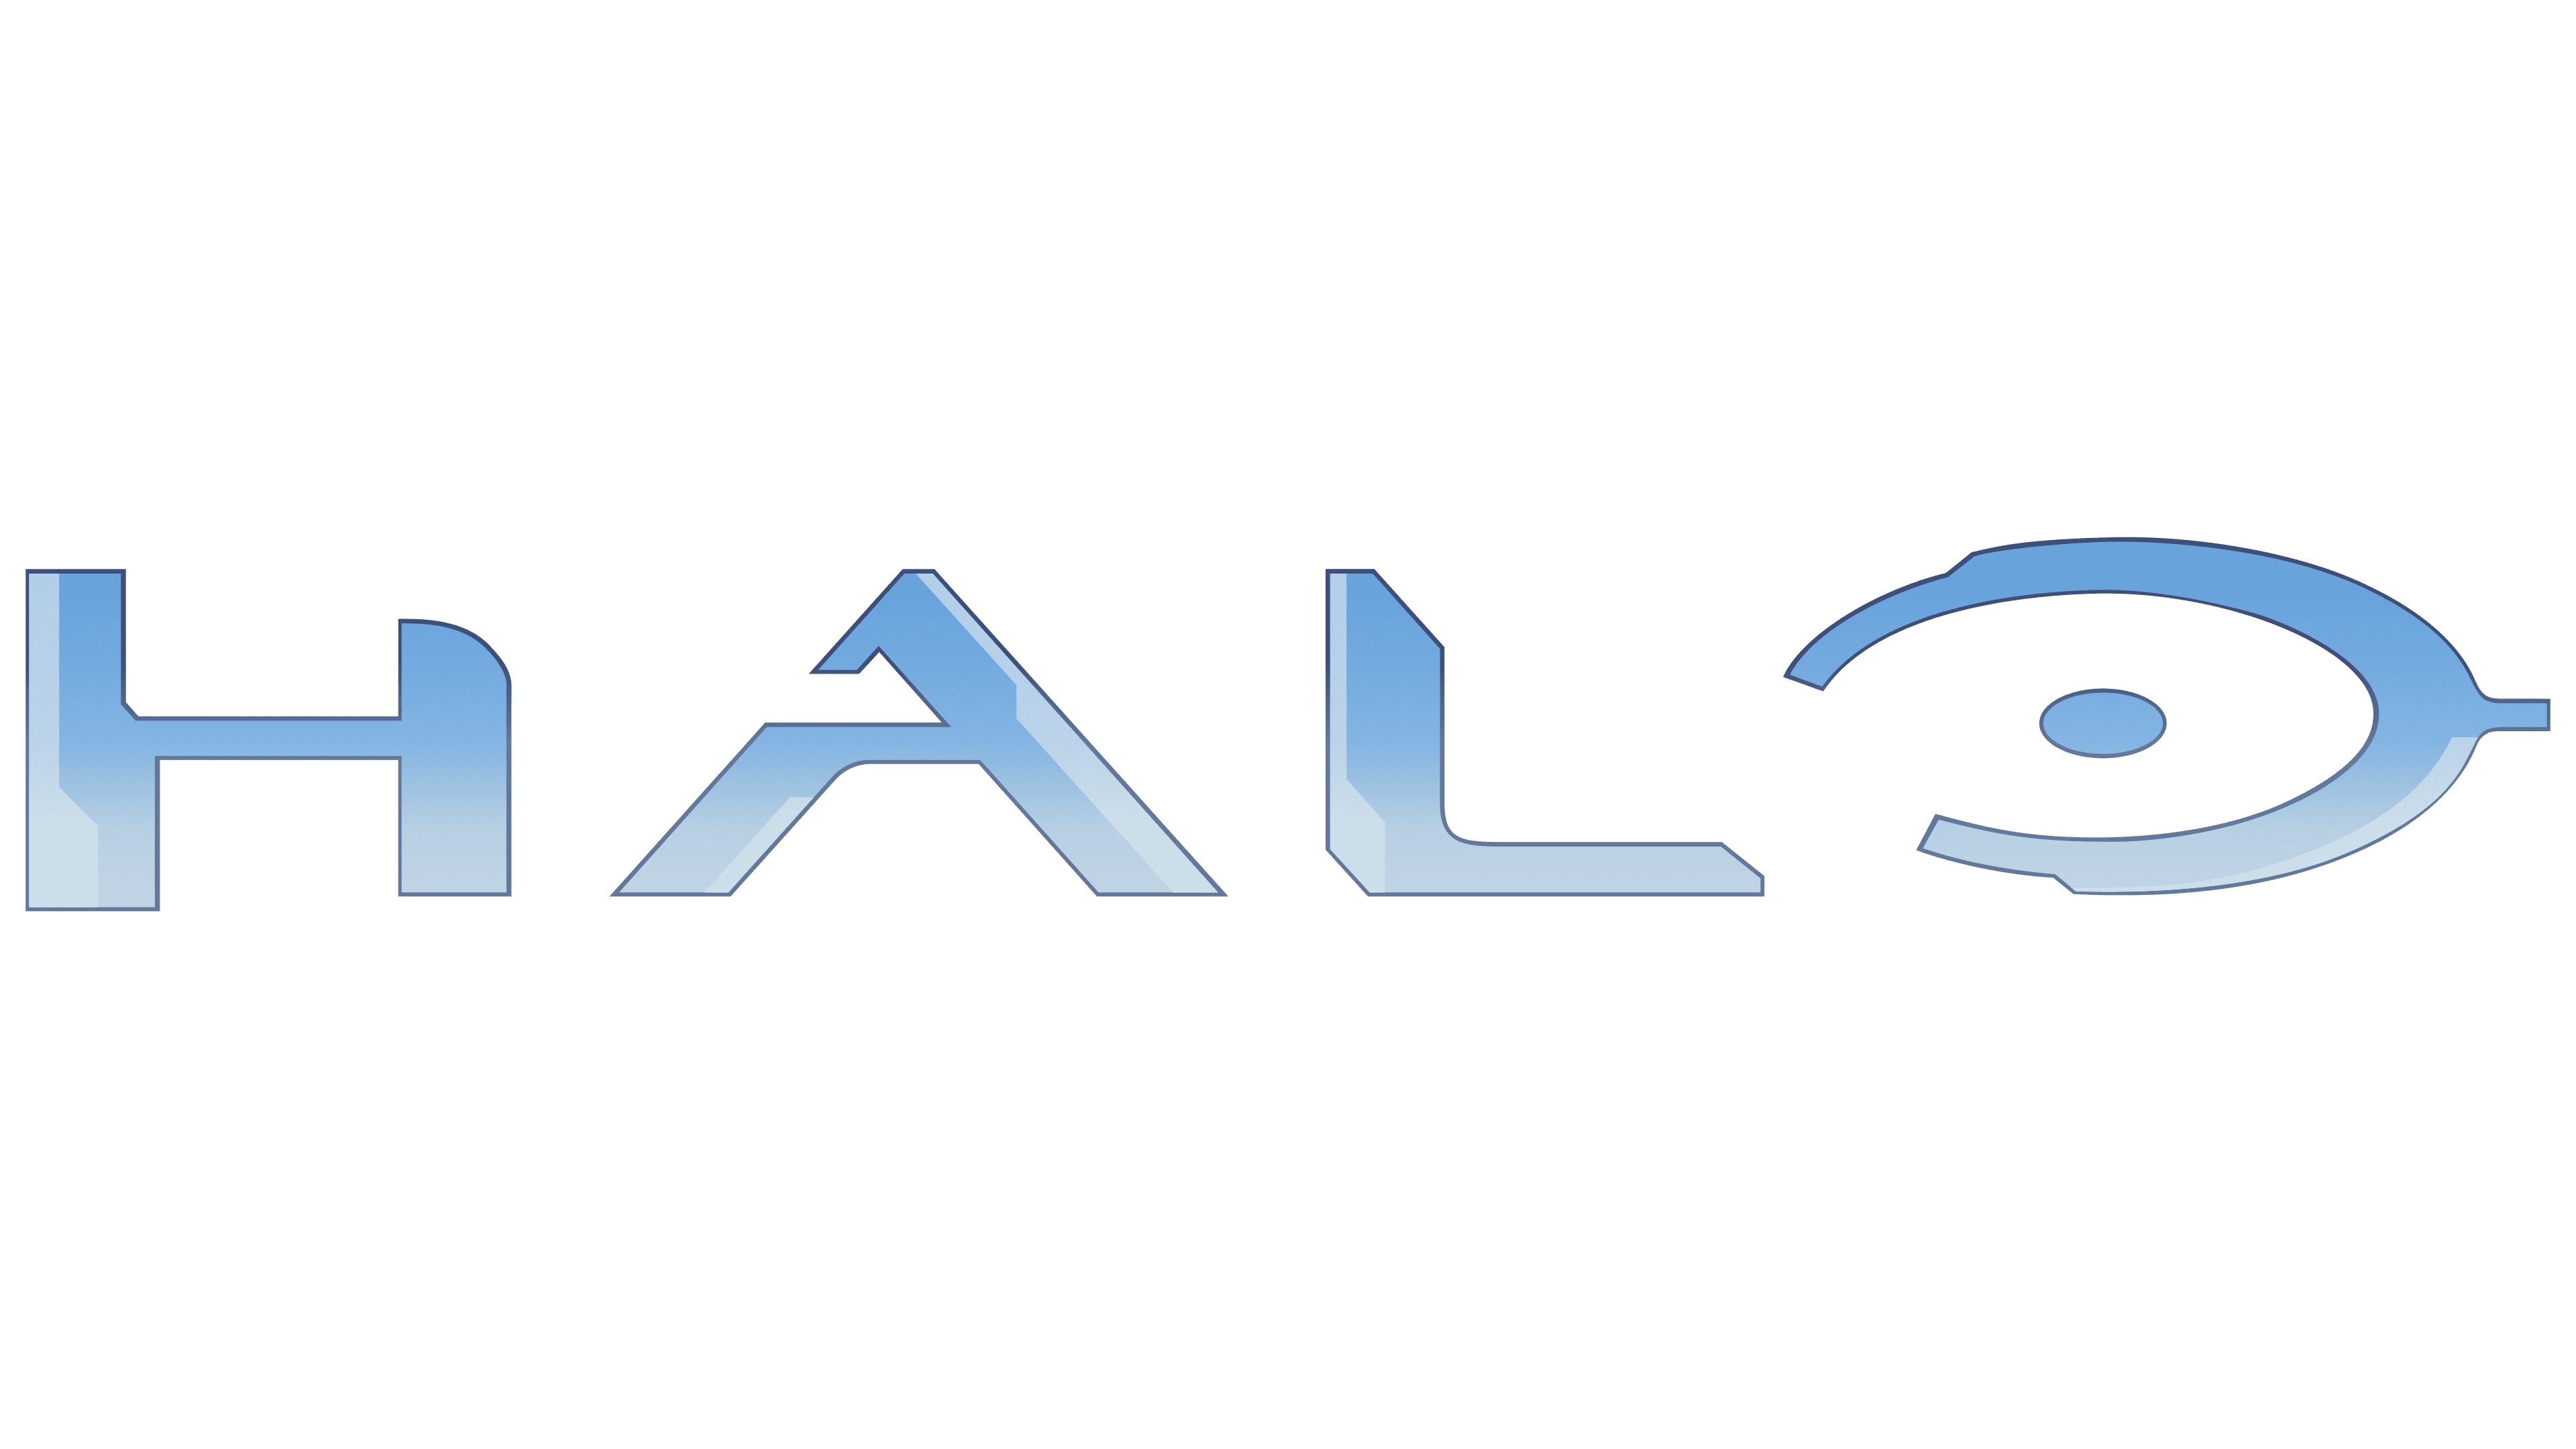 Halo Name Meaning & Origin